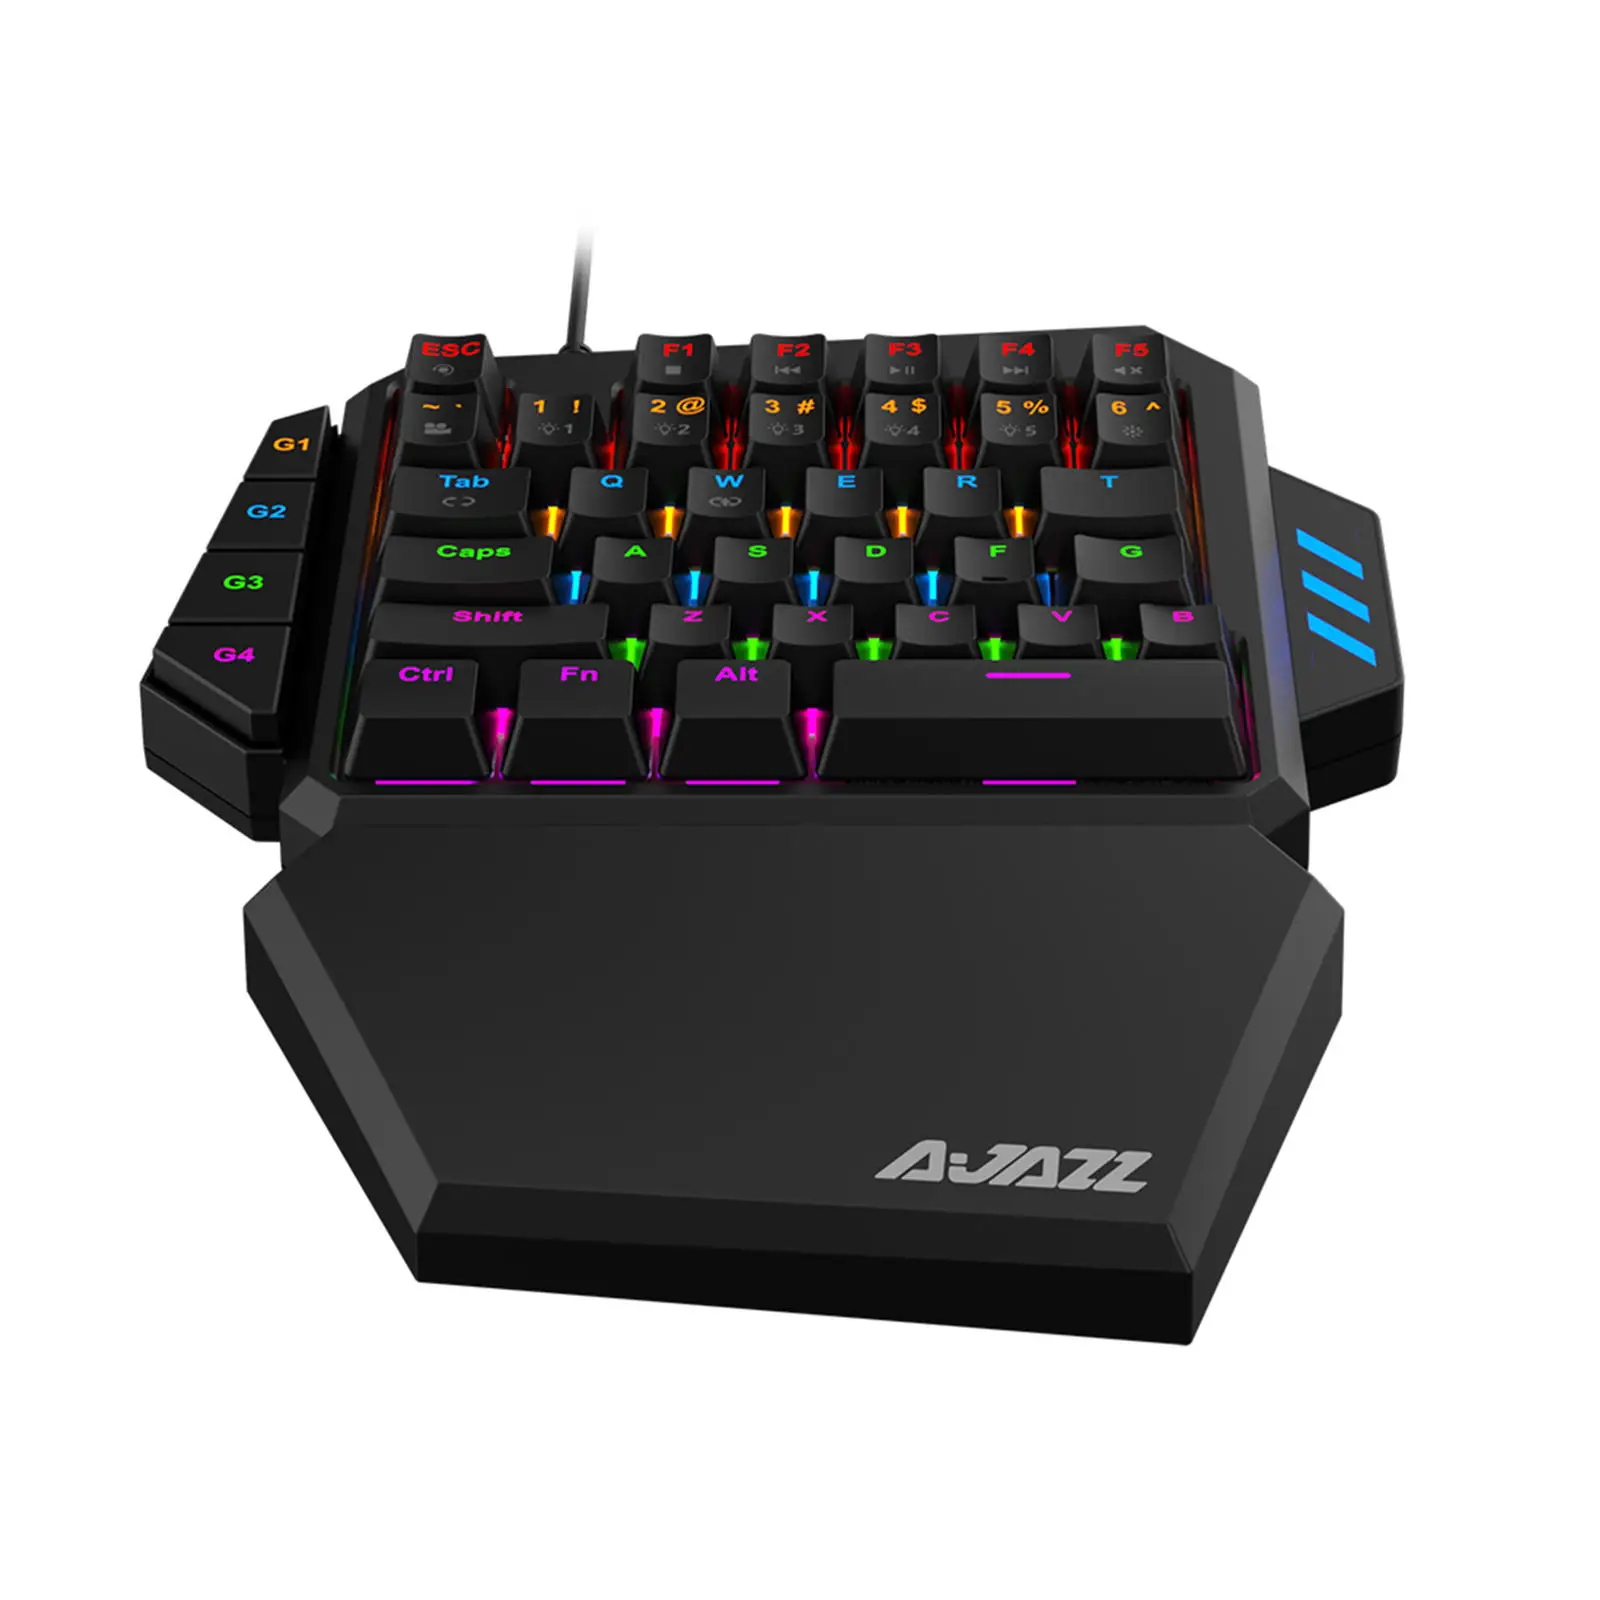 One-Handed Gaming Keyboard 39 Keys with Cable RGB Backlit LED Mini Keypad for Professional Gamers Computer PC Support Wrist Rest images - 6